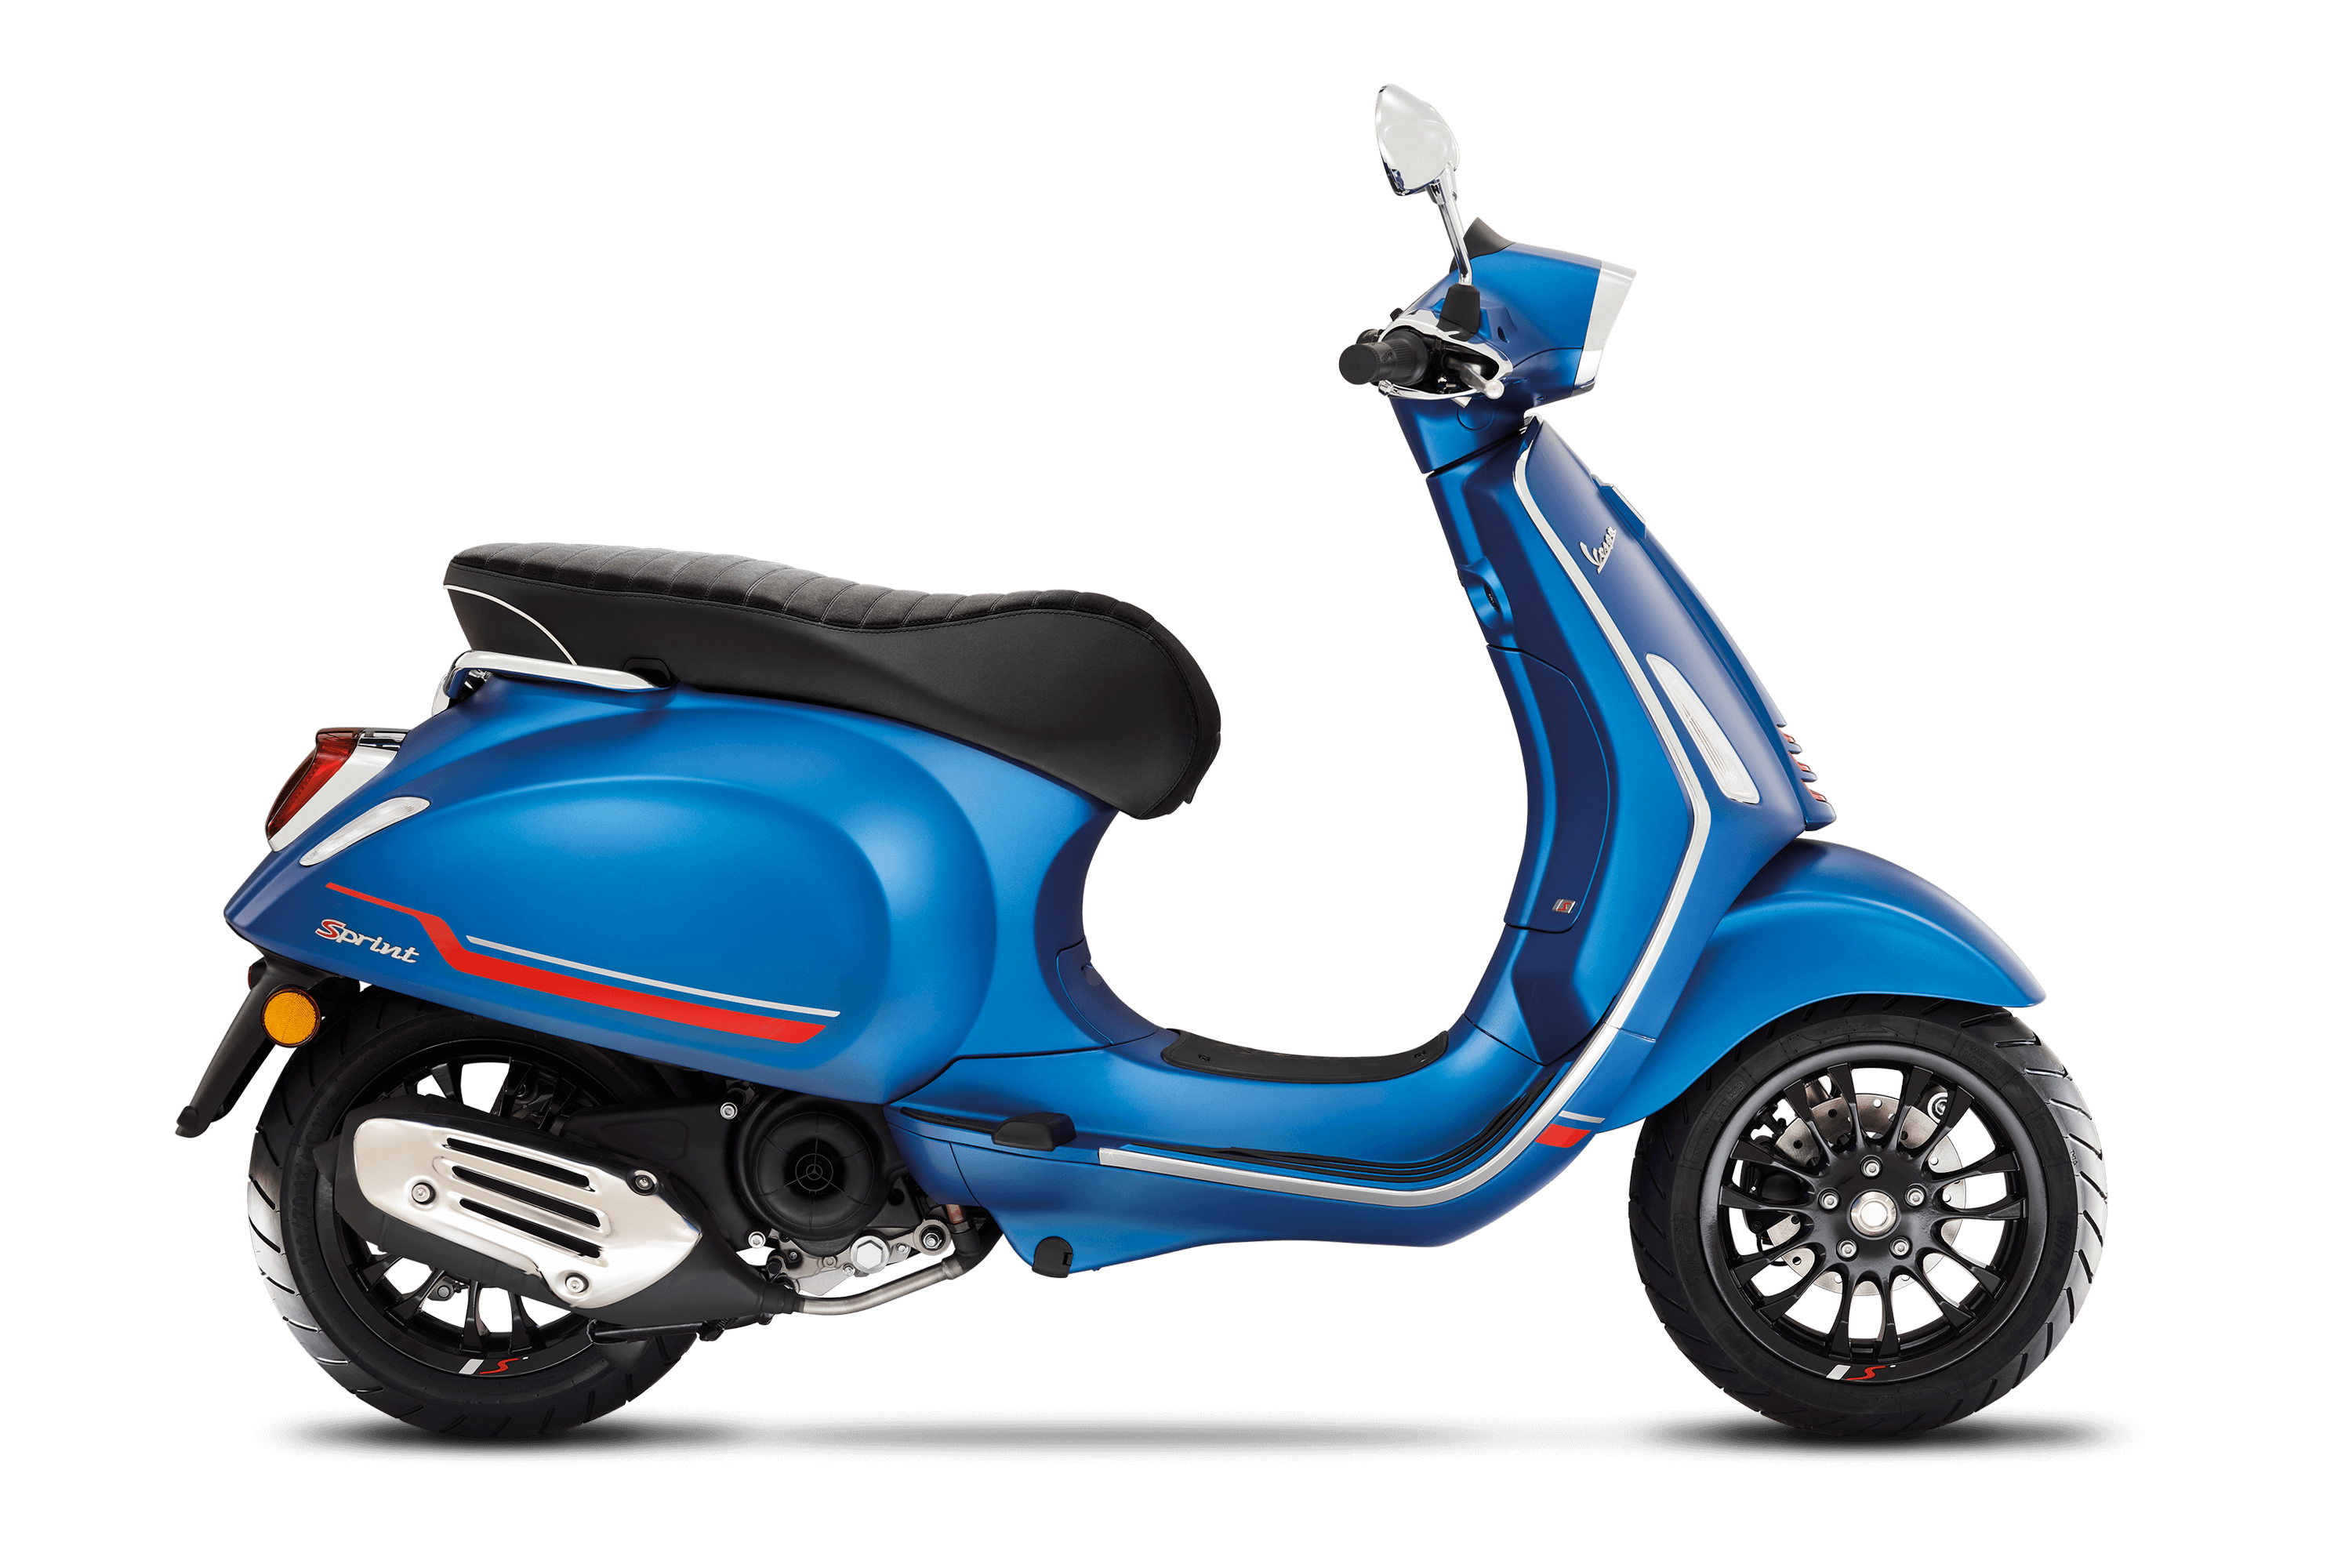 Vespa Sprint S 50 specs, features and price